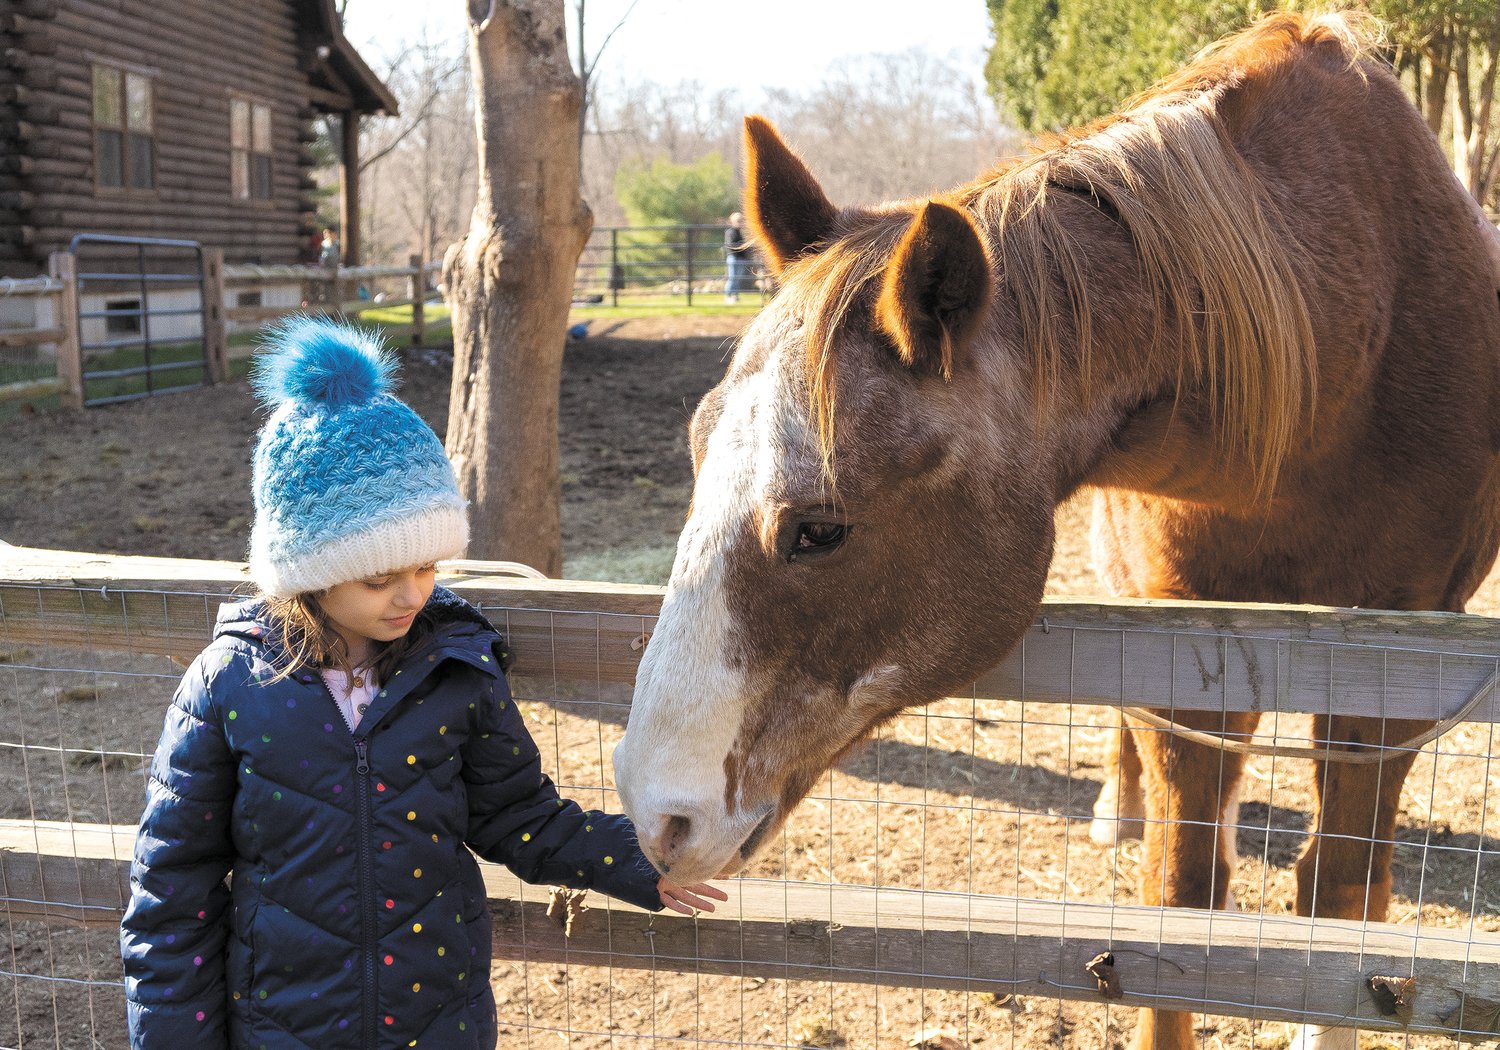 CONNECTING WITH HORSES: Stone Hill Elementary student Isabella Spitznagel spends some quality time with Chase, an Equine-Facilitated Learning horse living at Equi Evolution in Cumberland. Stone Hill students spent the late morning and early afternoon of Nov. 23 on the farm learning about the horses through sensory activities.